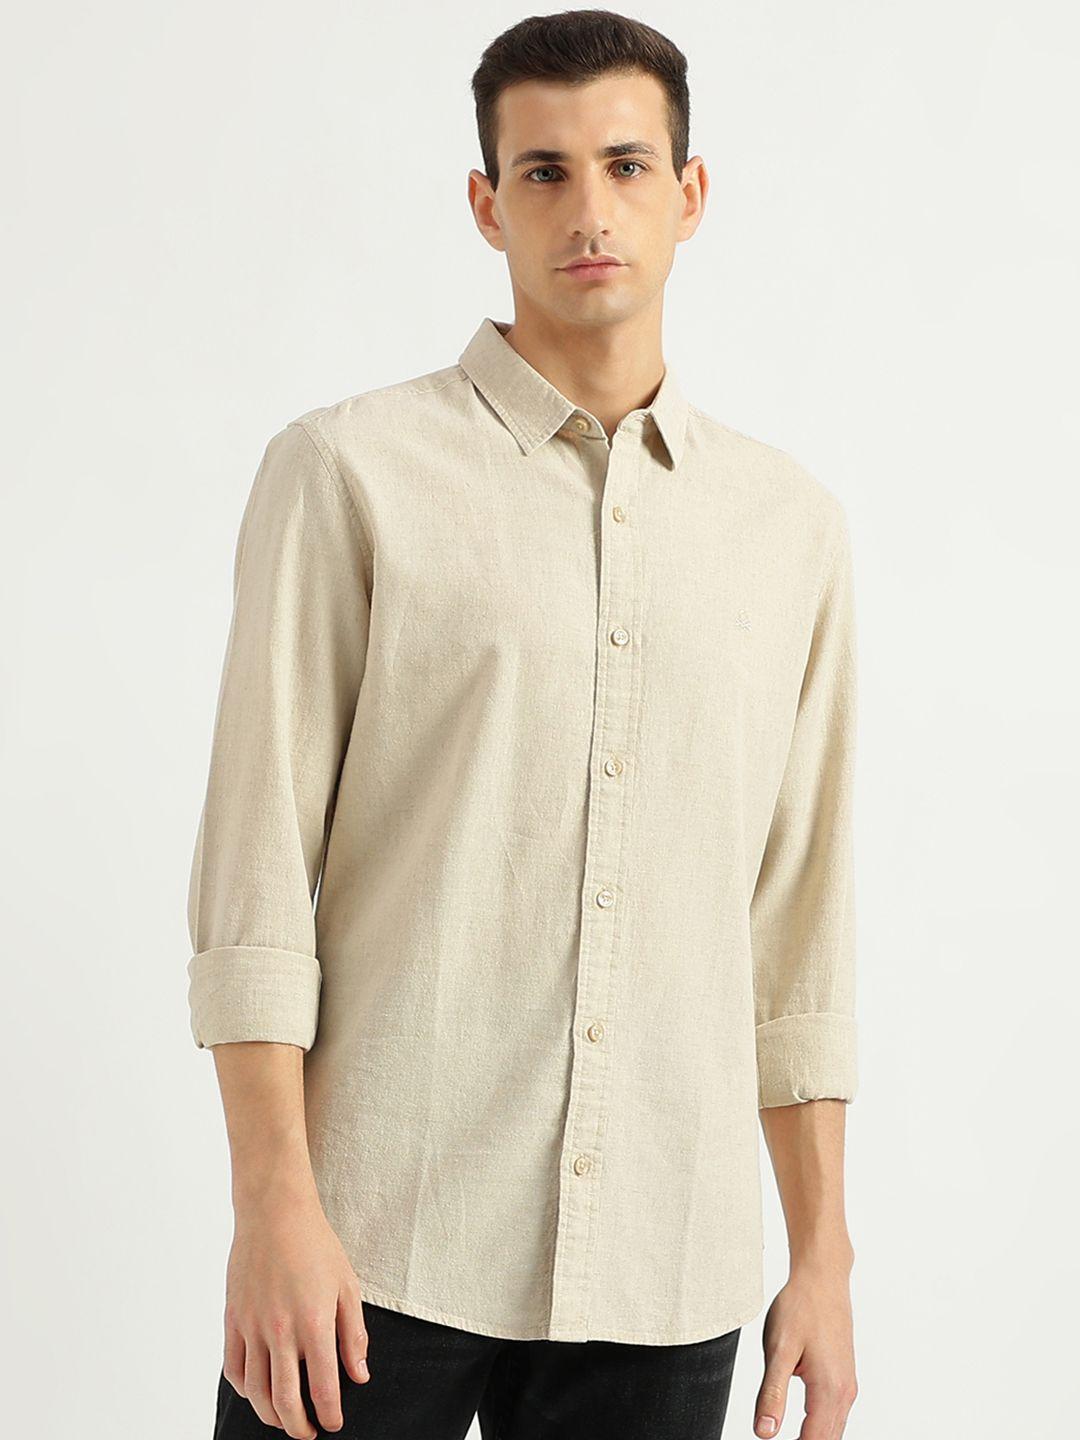 united colors of benetton slim fit spread collar casual shirt